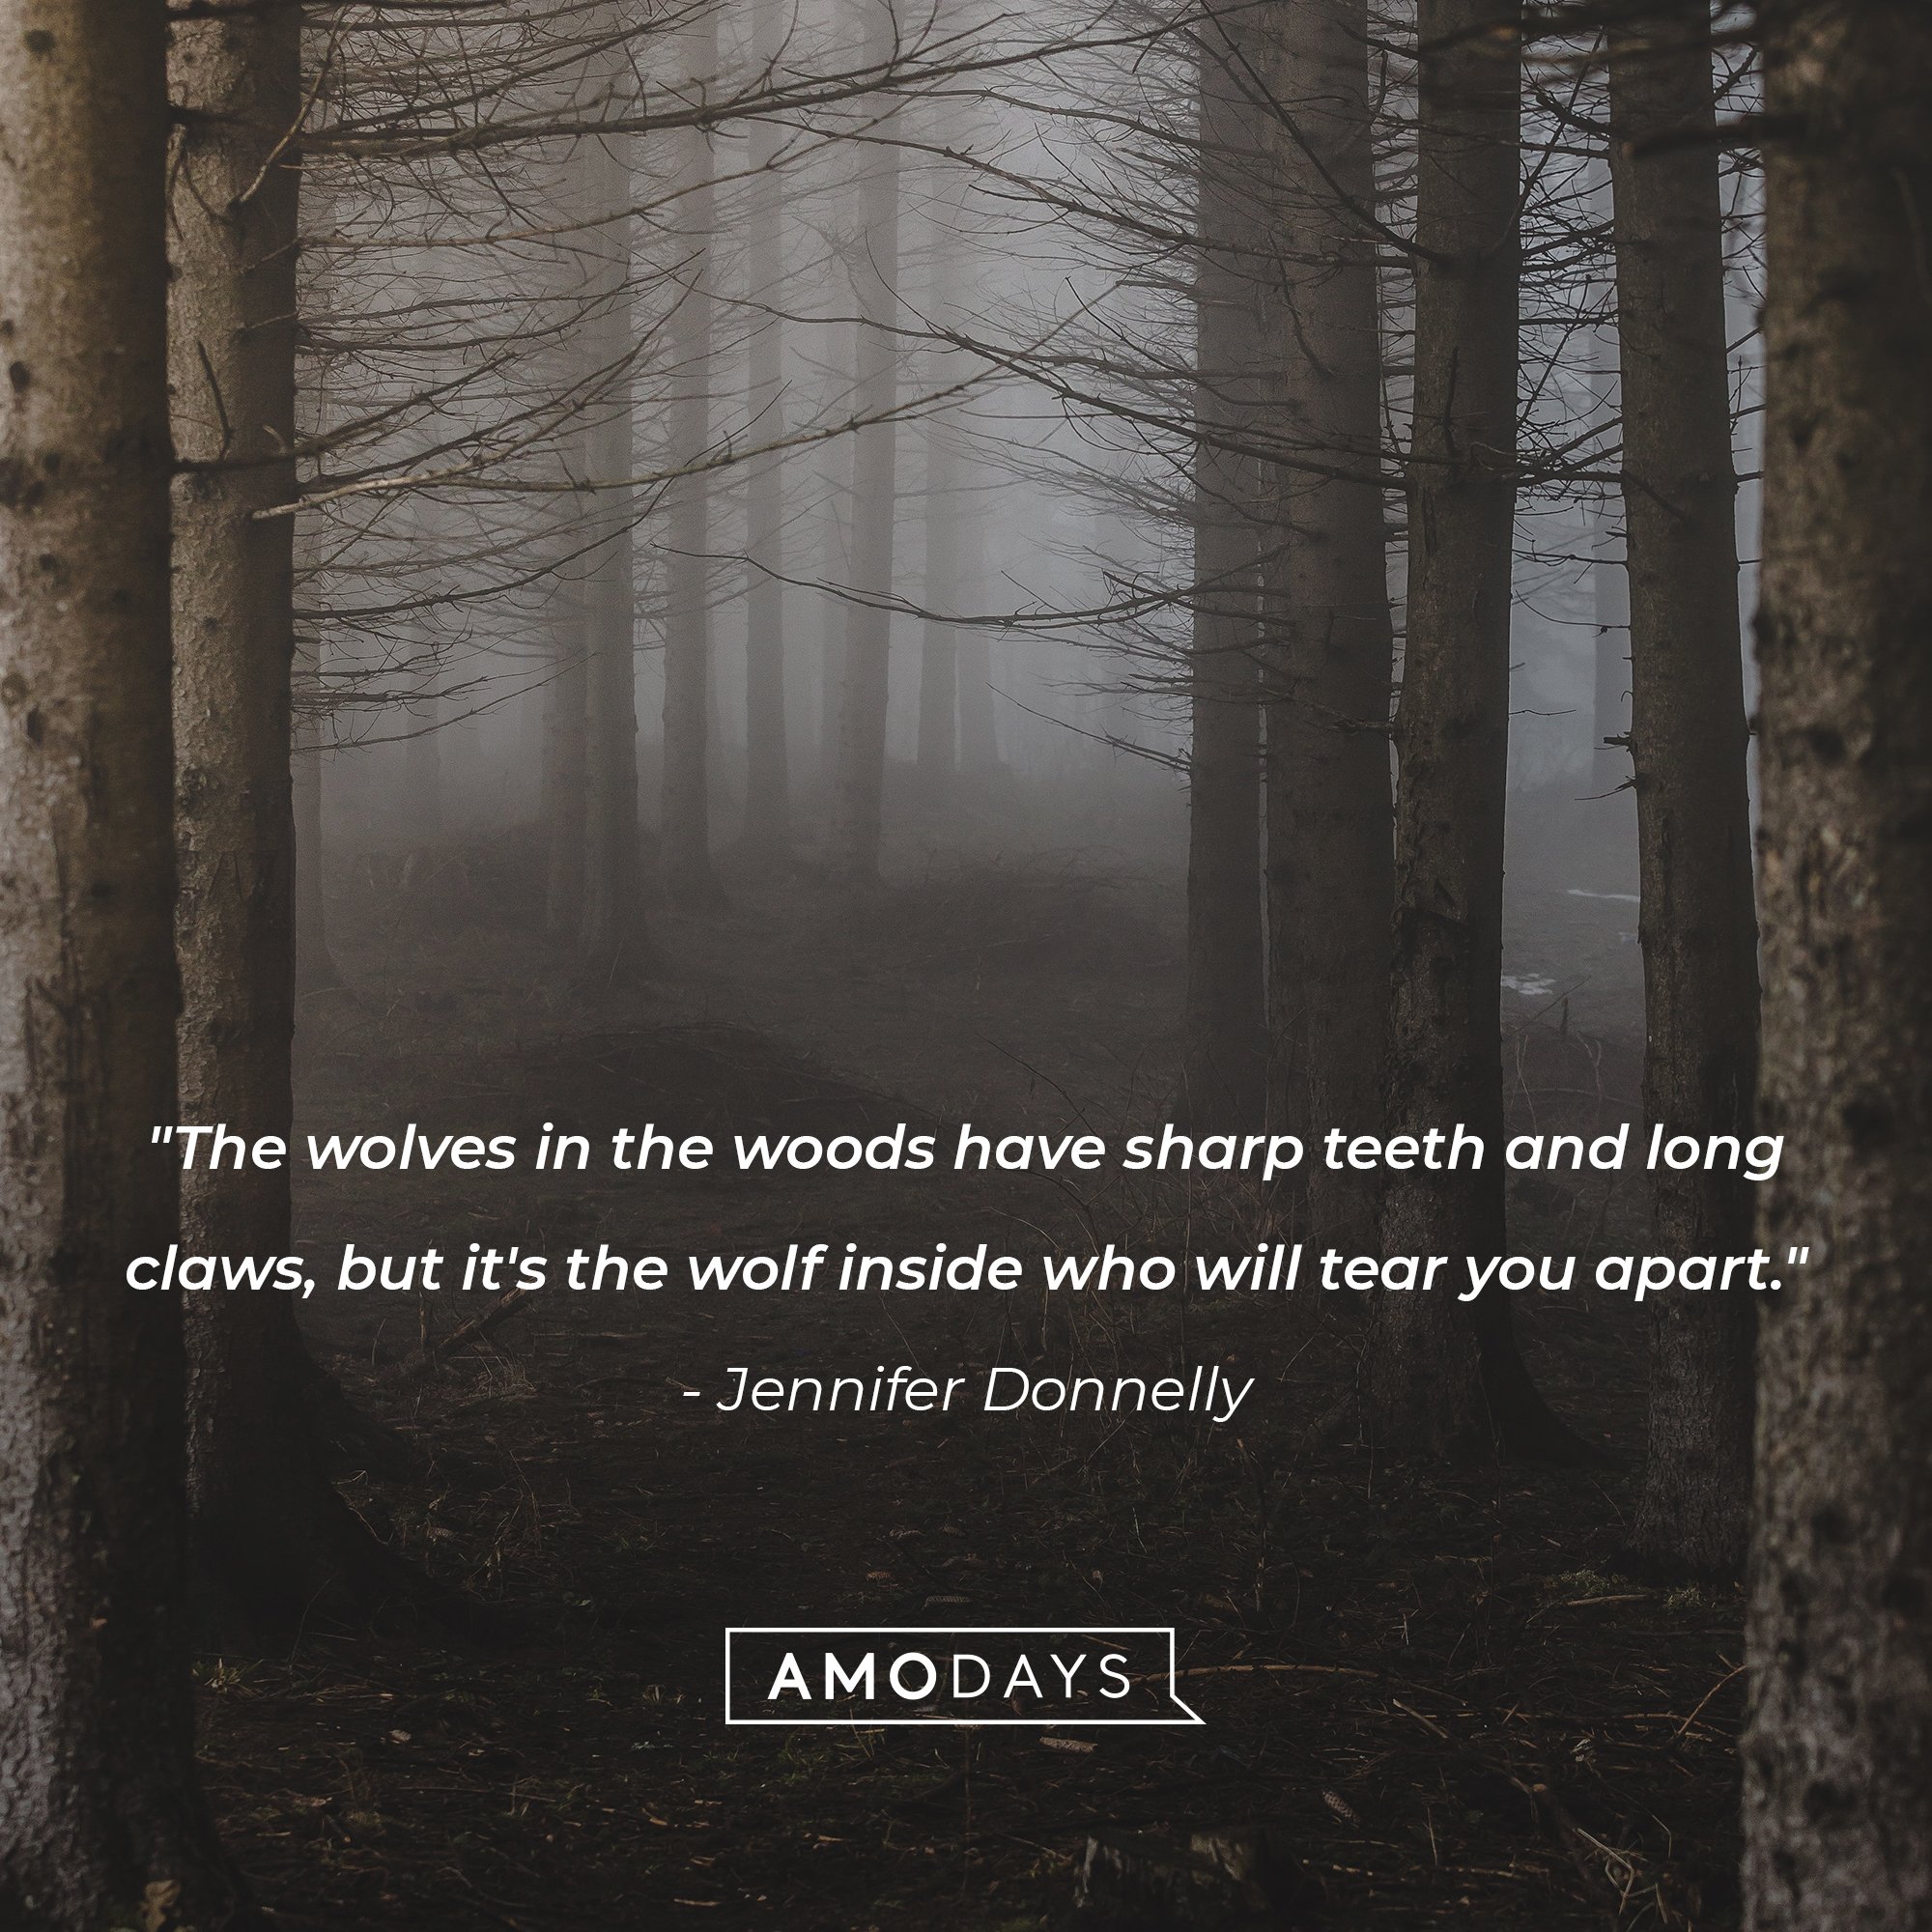 Jennifer Donnelly's quote: "The wolves in the woods have sharp teeth and long claws, but it's the wolf inside who will tear you apart." | Image: AmoDays